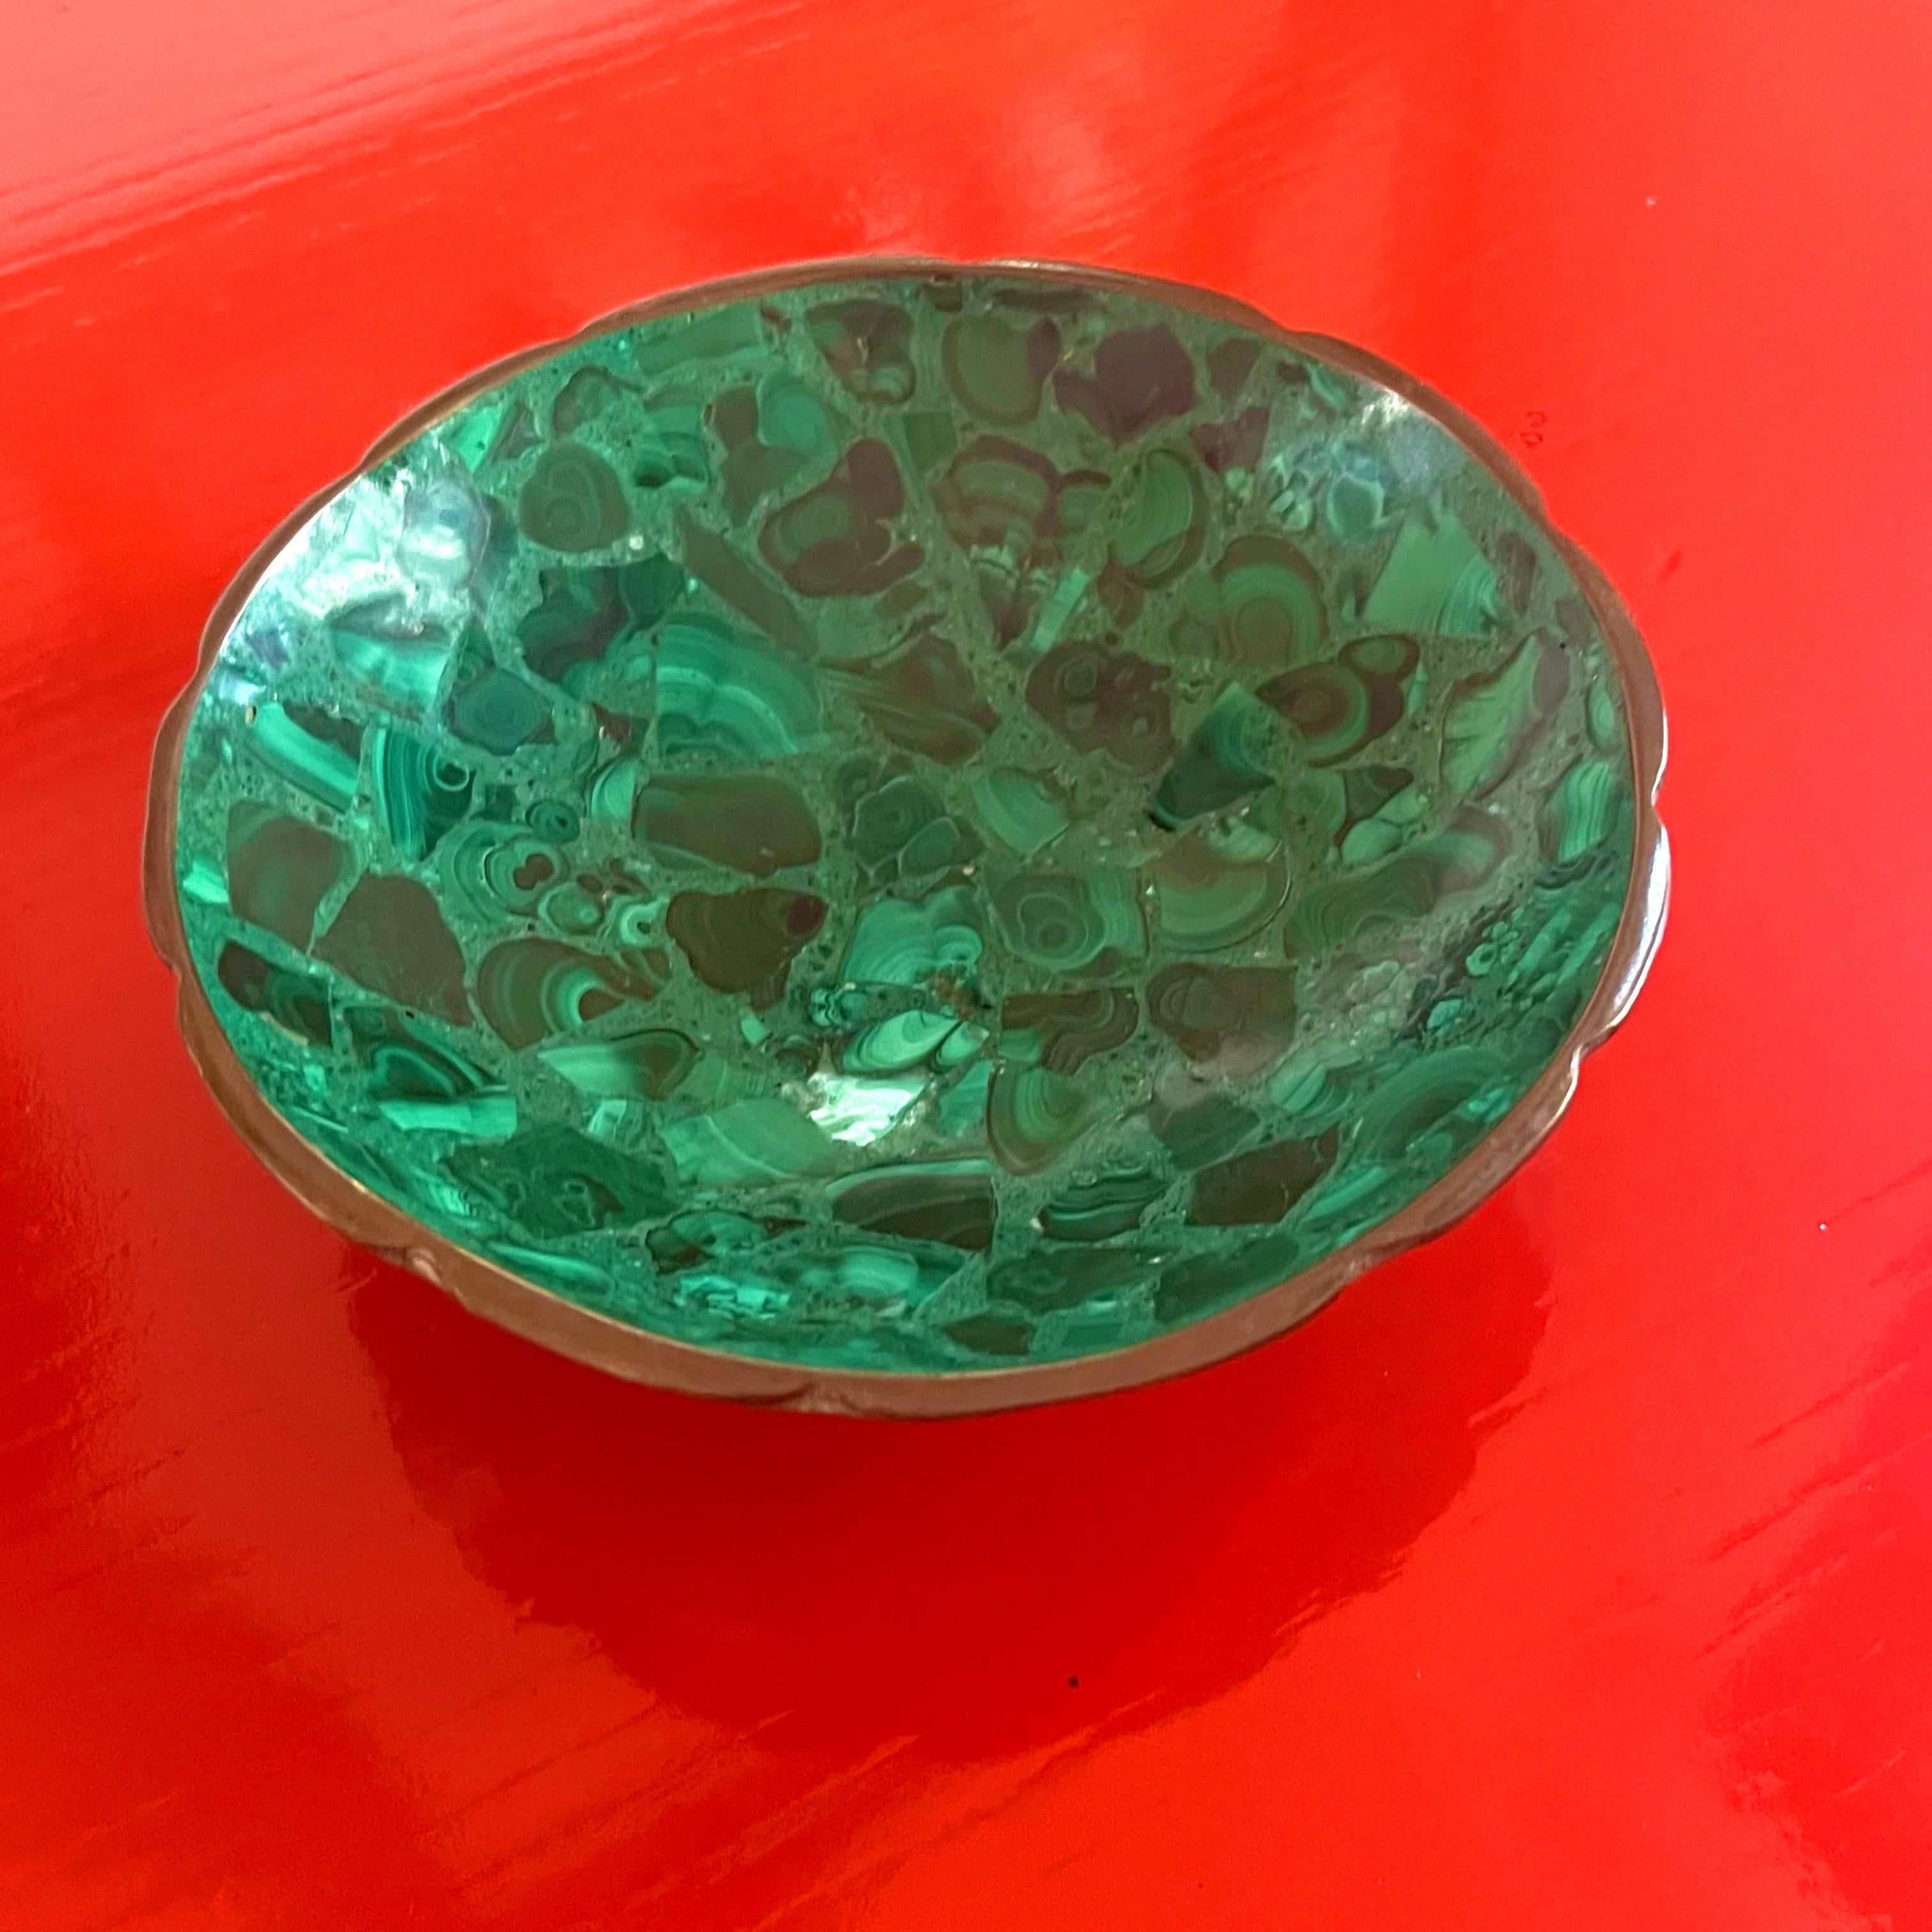 A stunning mid-century modern authentic malachite bowl with a brass scalloped rim.  The details in this piece are fantastic.  Great decorative bowl or catchall.